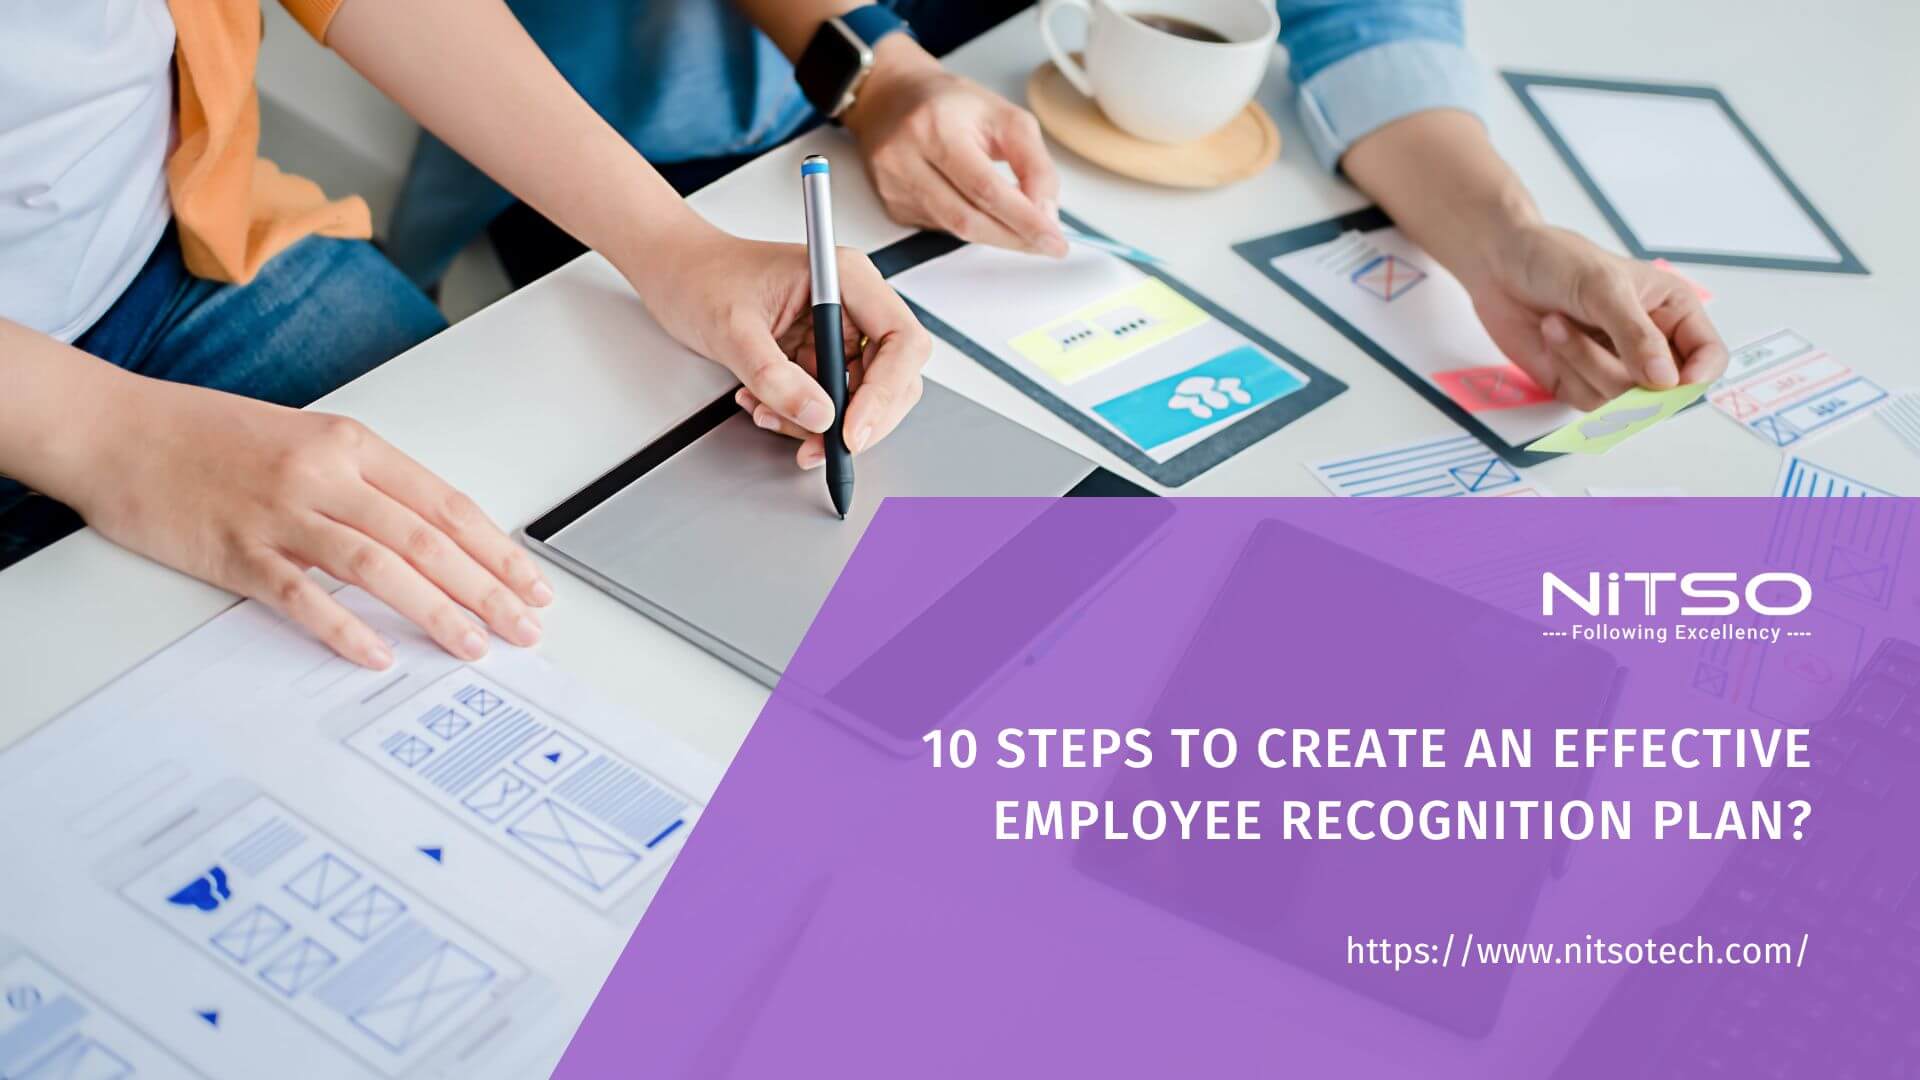 How to Build an Effective Employee Recognition Program?